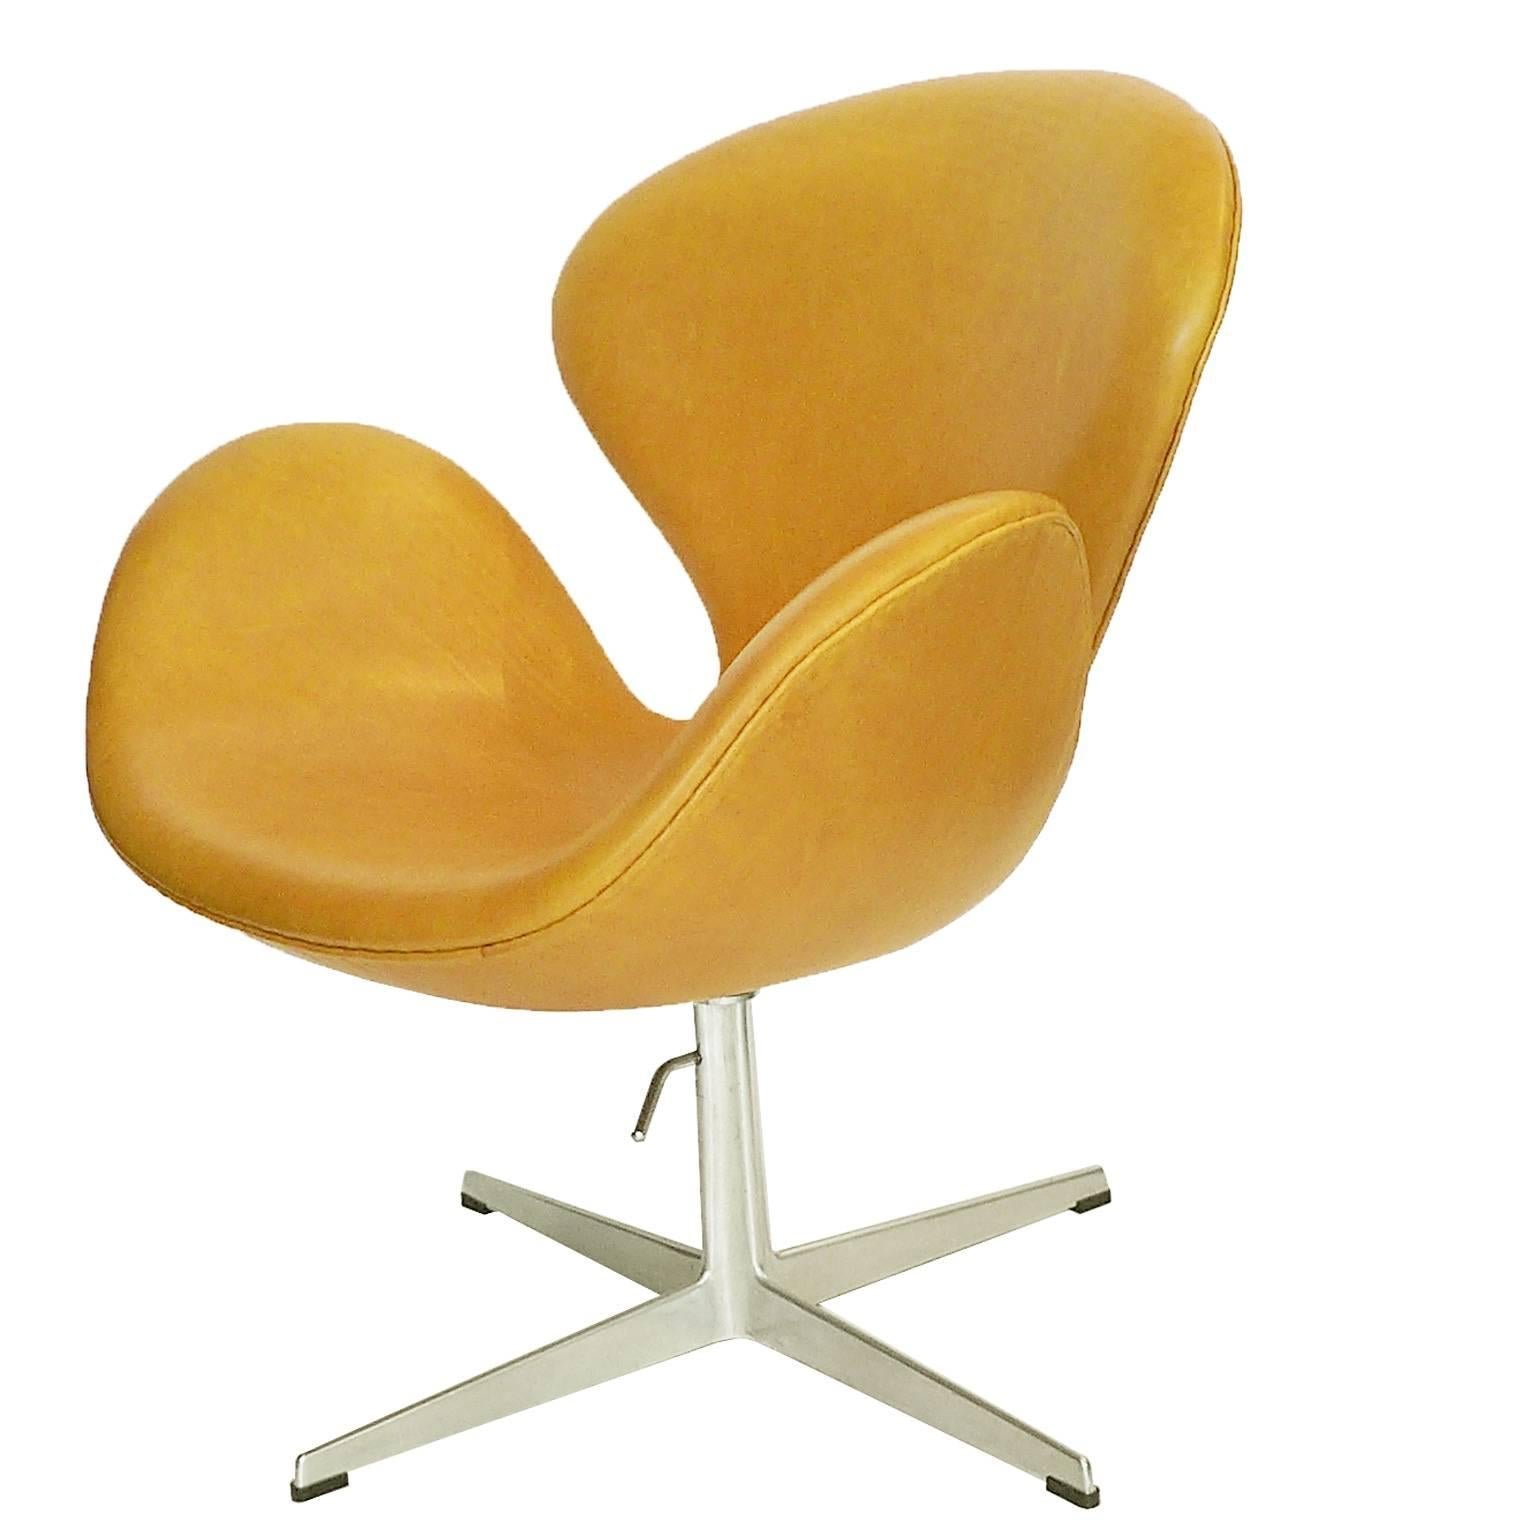 Danish Early Rare Adjustable Swan Chair by Arne Jacobsen in Golden Tan Leather For Sale